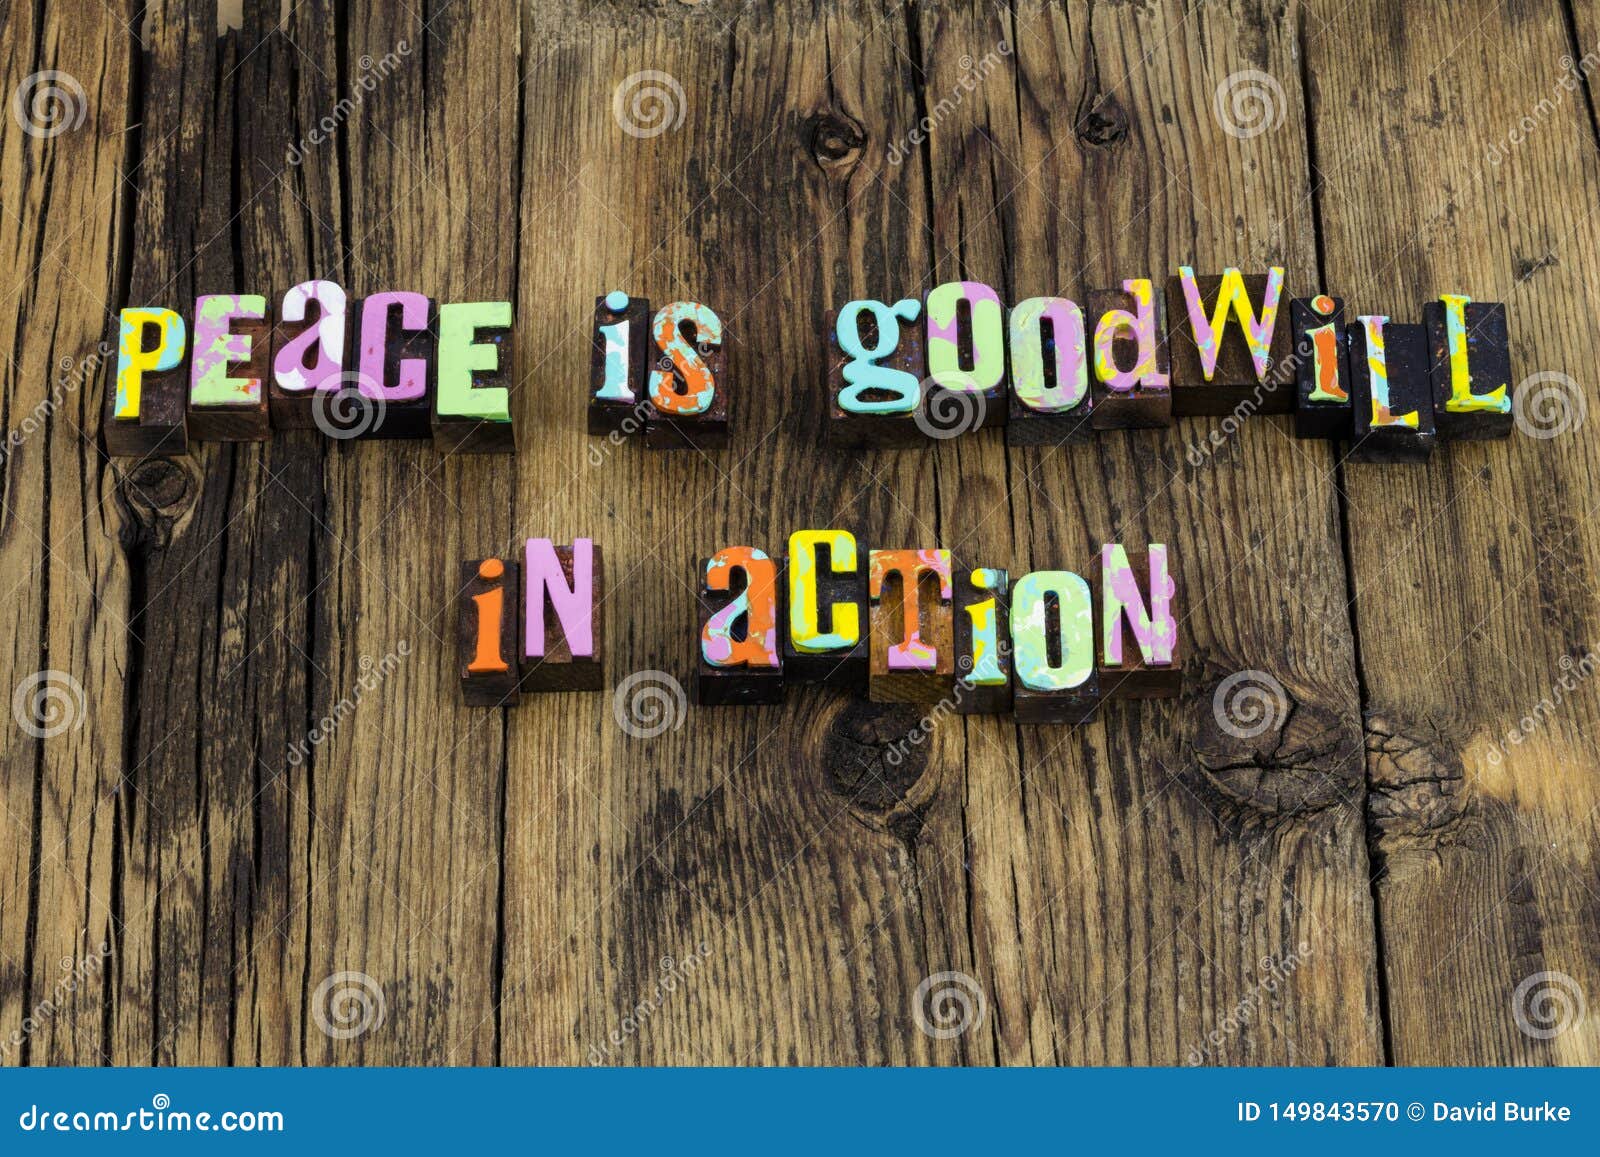 peace goodwill action love kindness help volunteer charity